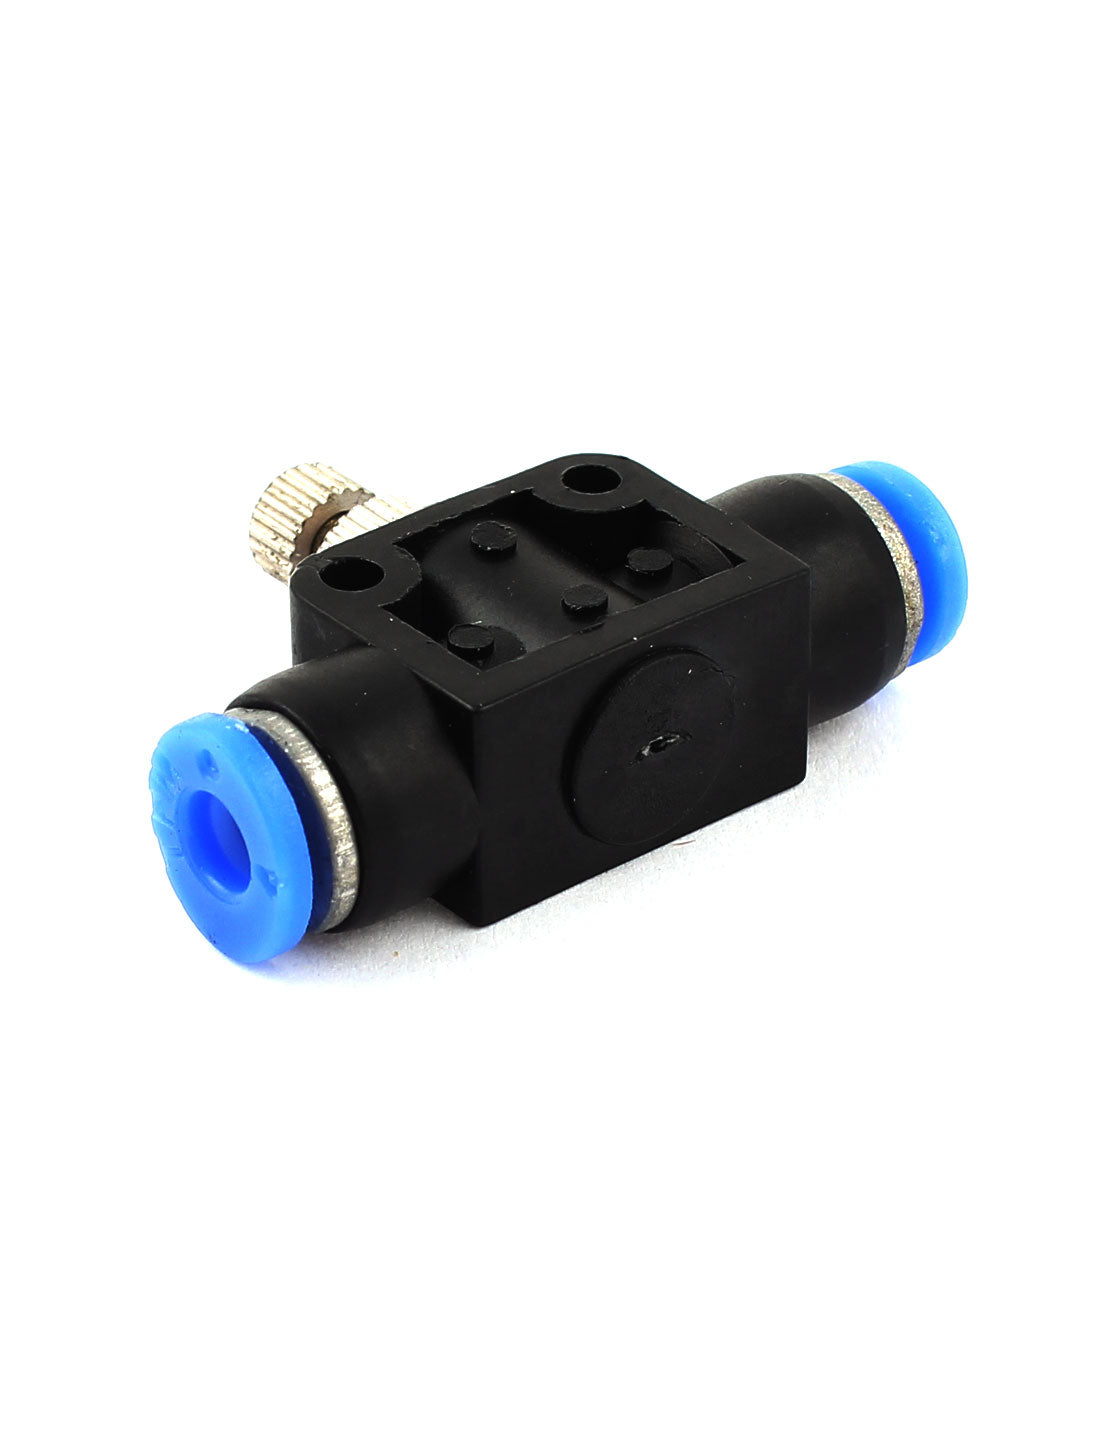 uxcell Uxcell Push in to Connect Inline Air Fitting Pneumatic Speed Flow Control Tube Valve 4 mm OD